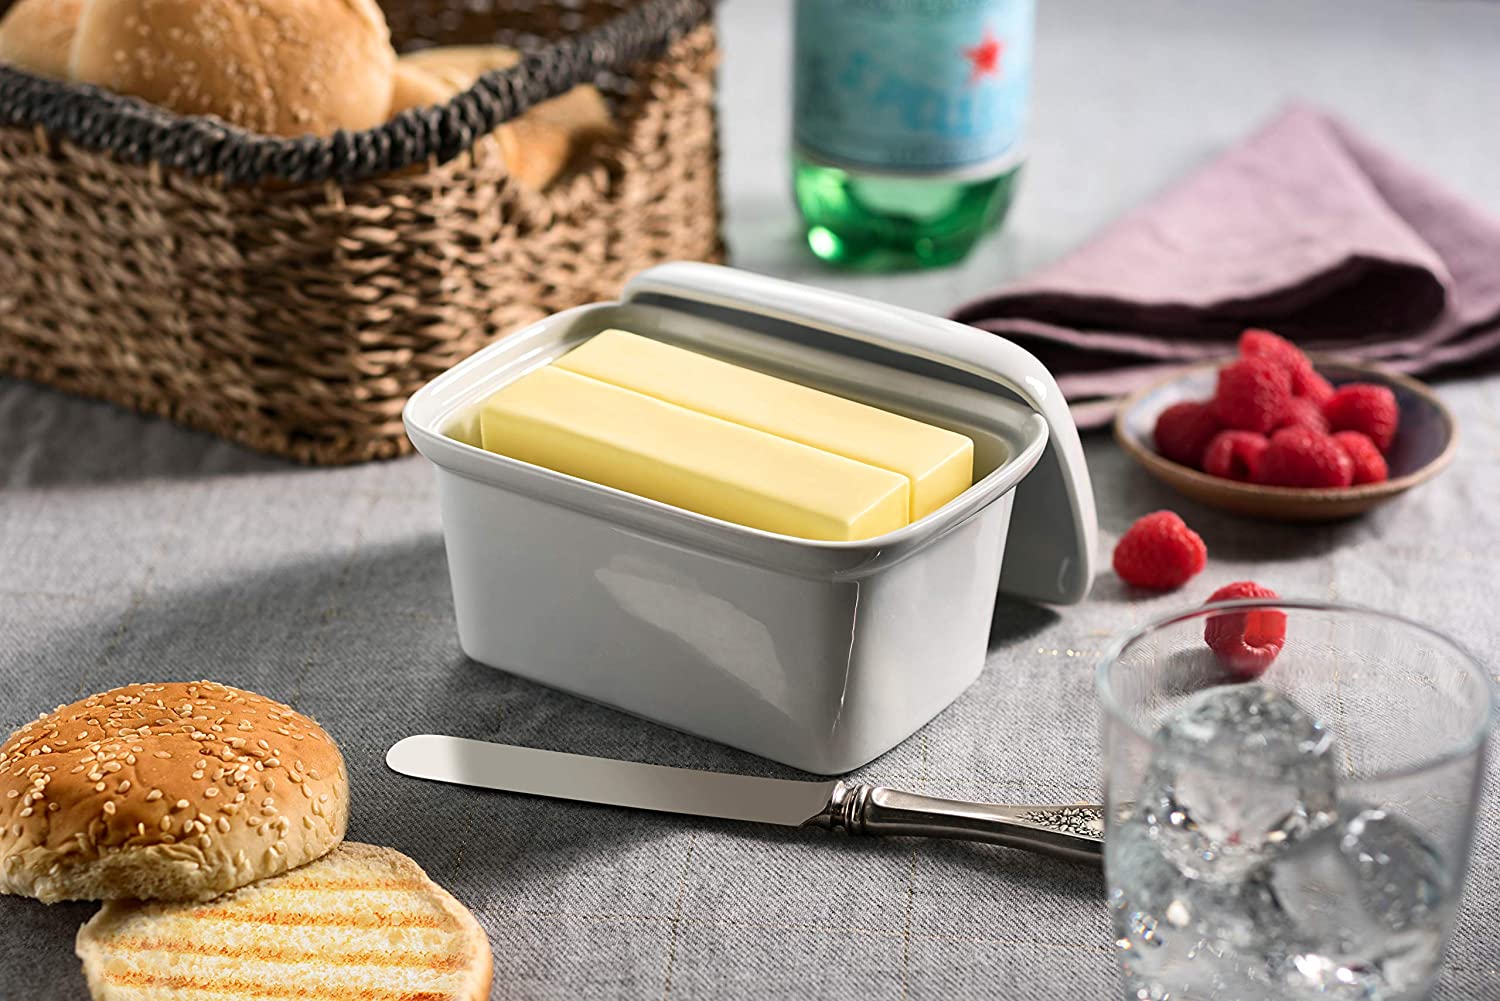 GOURMEX Large Butter Box with Lid | Fits One Pound of Butter